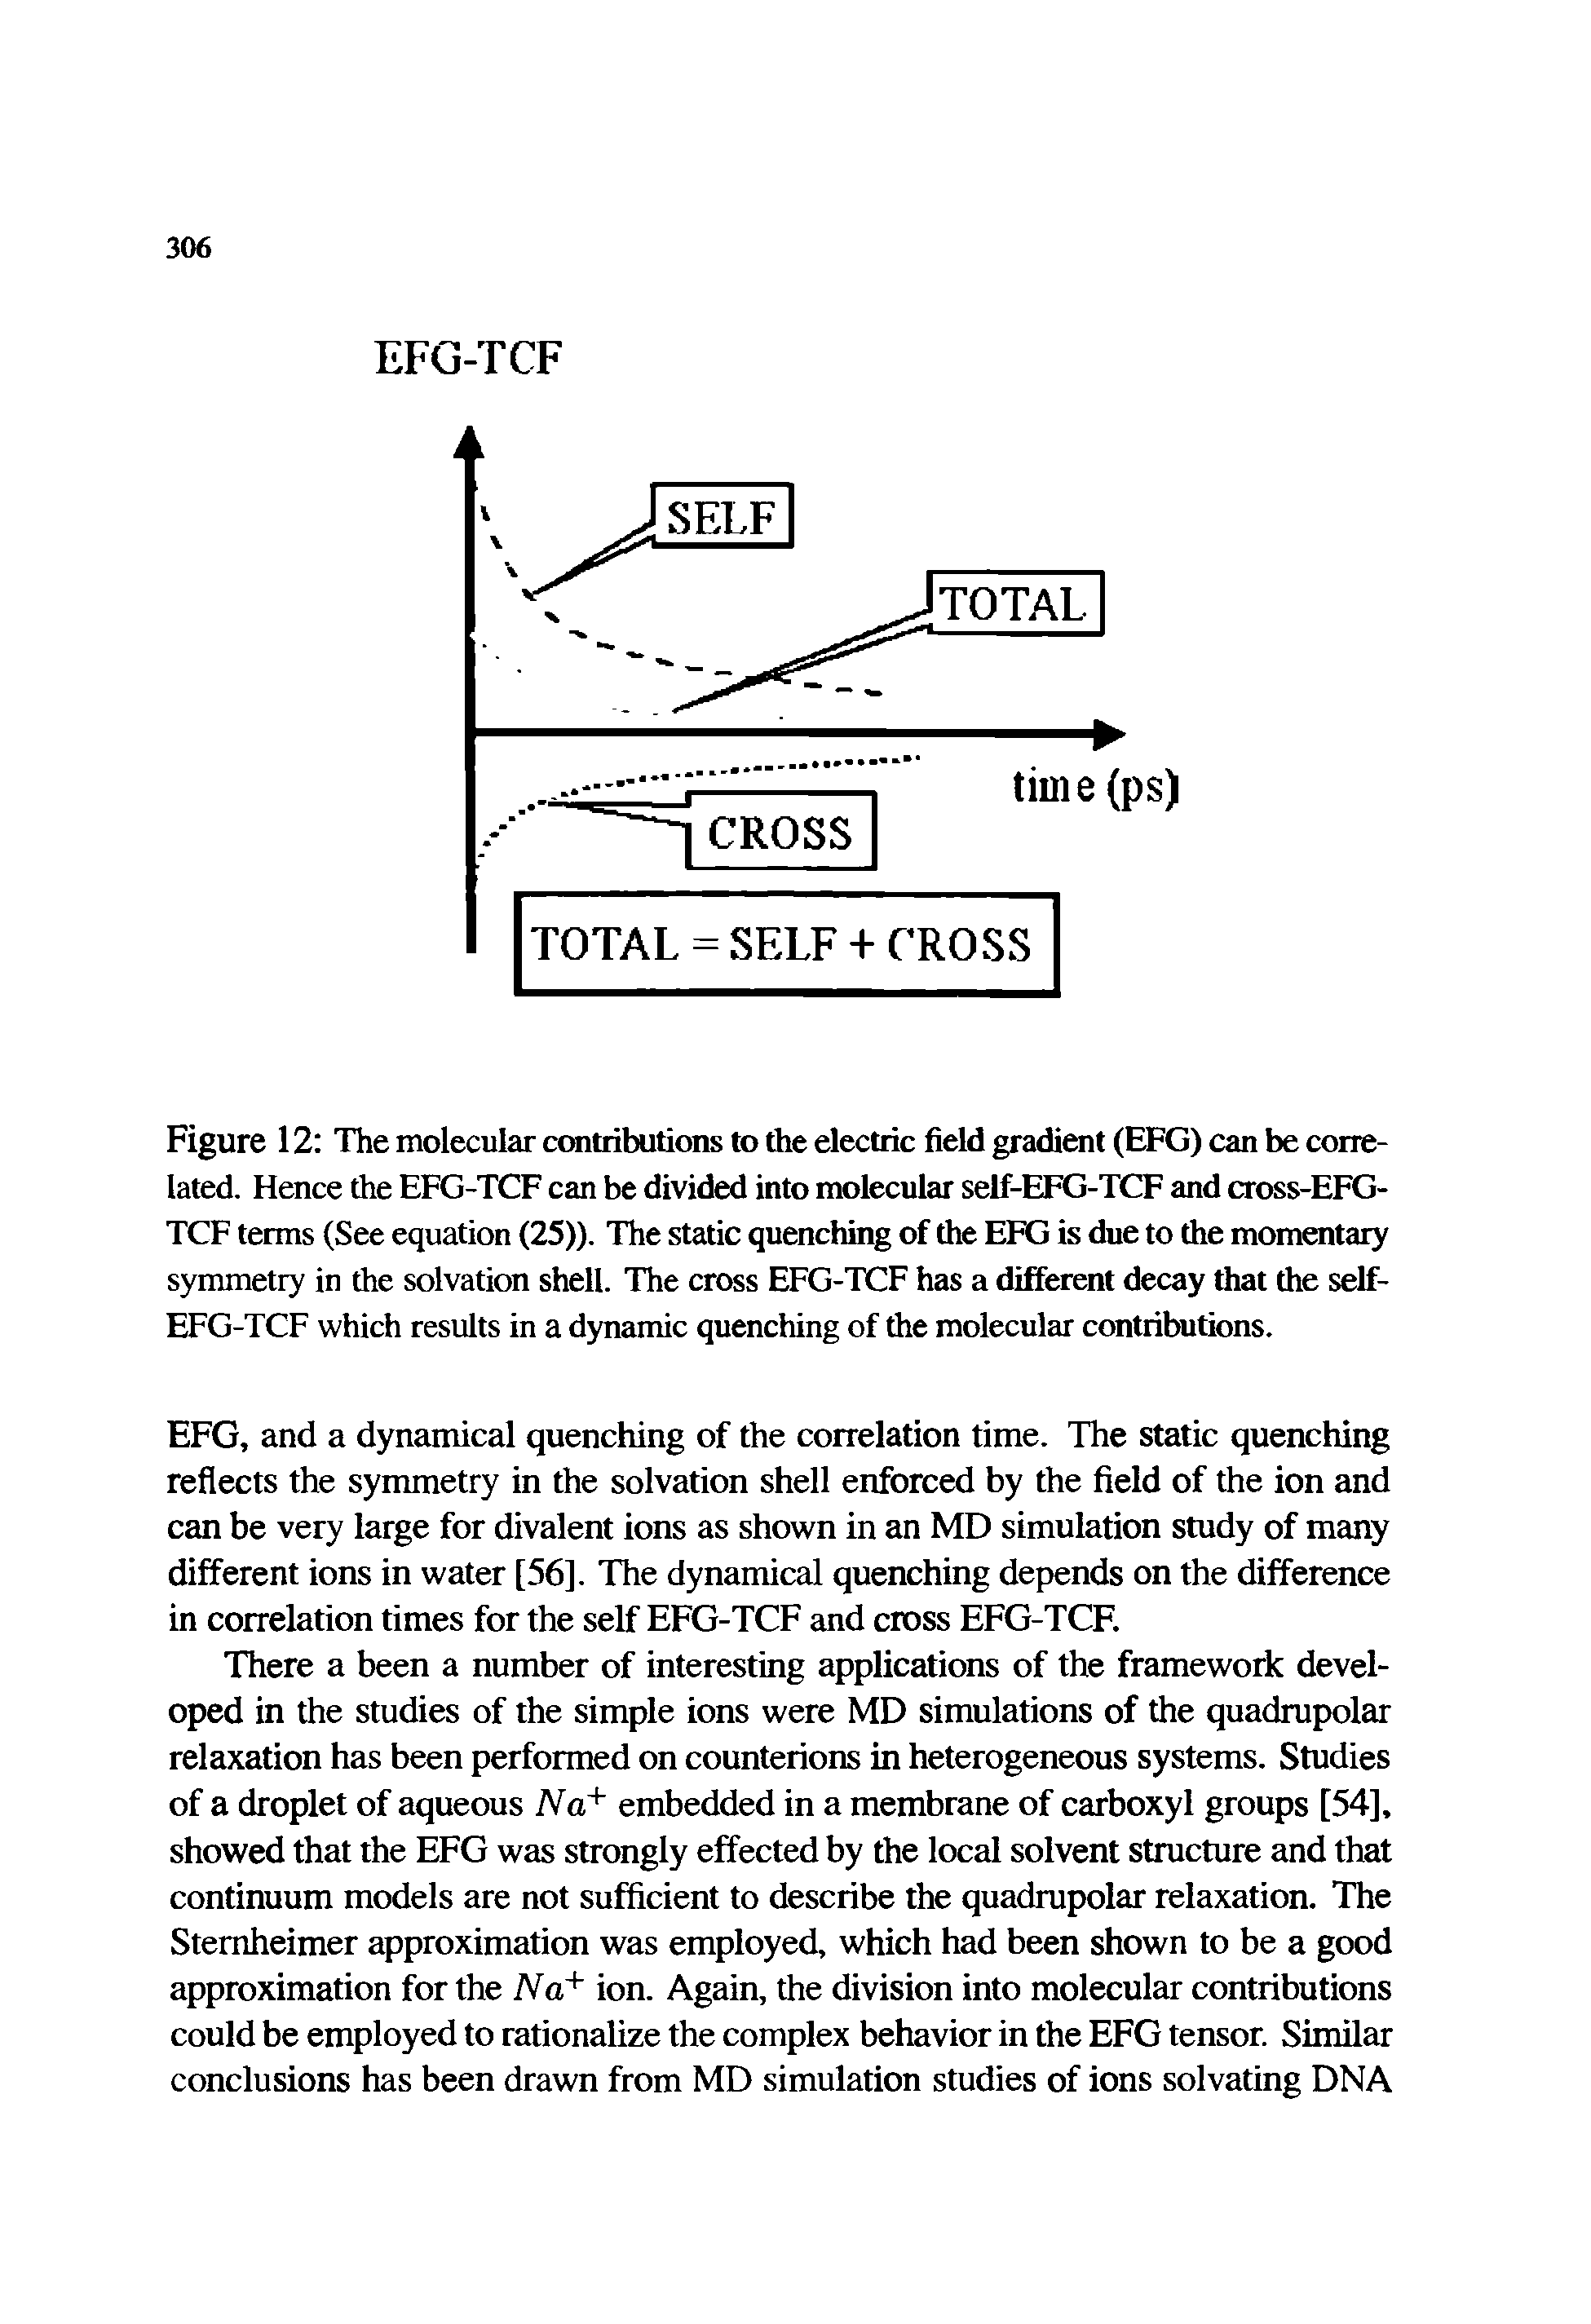 Figure 12 The molecular contributions to the electric field gradient (EFG) can be correlated. Hence the EFG-TCF can be divided into molecular self-EFG-TCF and cross-EFG-TCF terms (See equation (25)). The static quenching of the EFG is due to the momentary symmetry in the solvation shell. The cross EFG-TCF has a different decay that the self-EFG-TCF which results in a dynamic quenching of the molecular contributions.